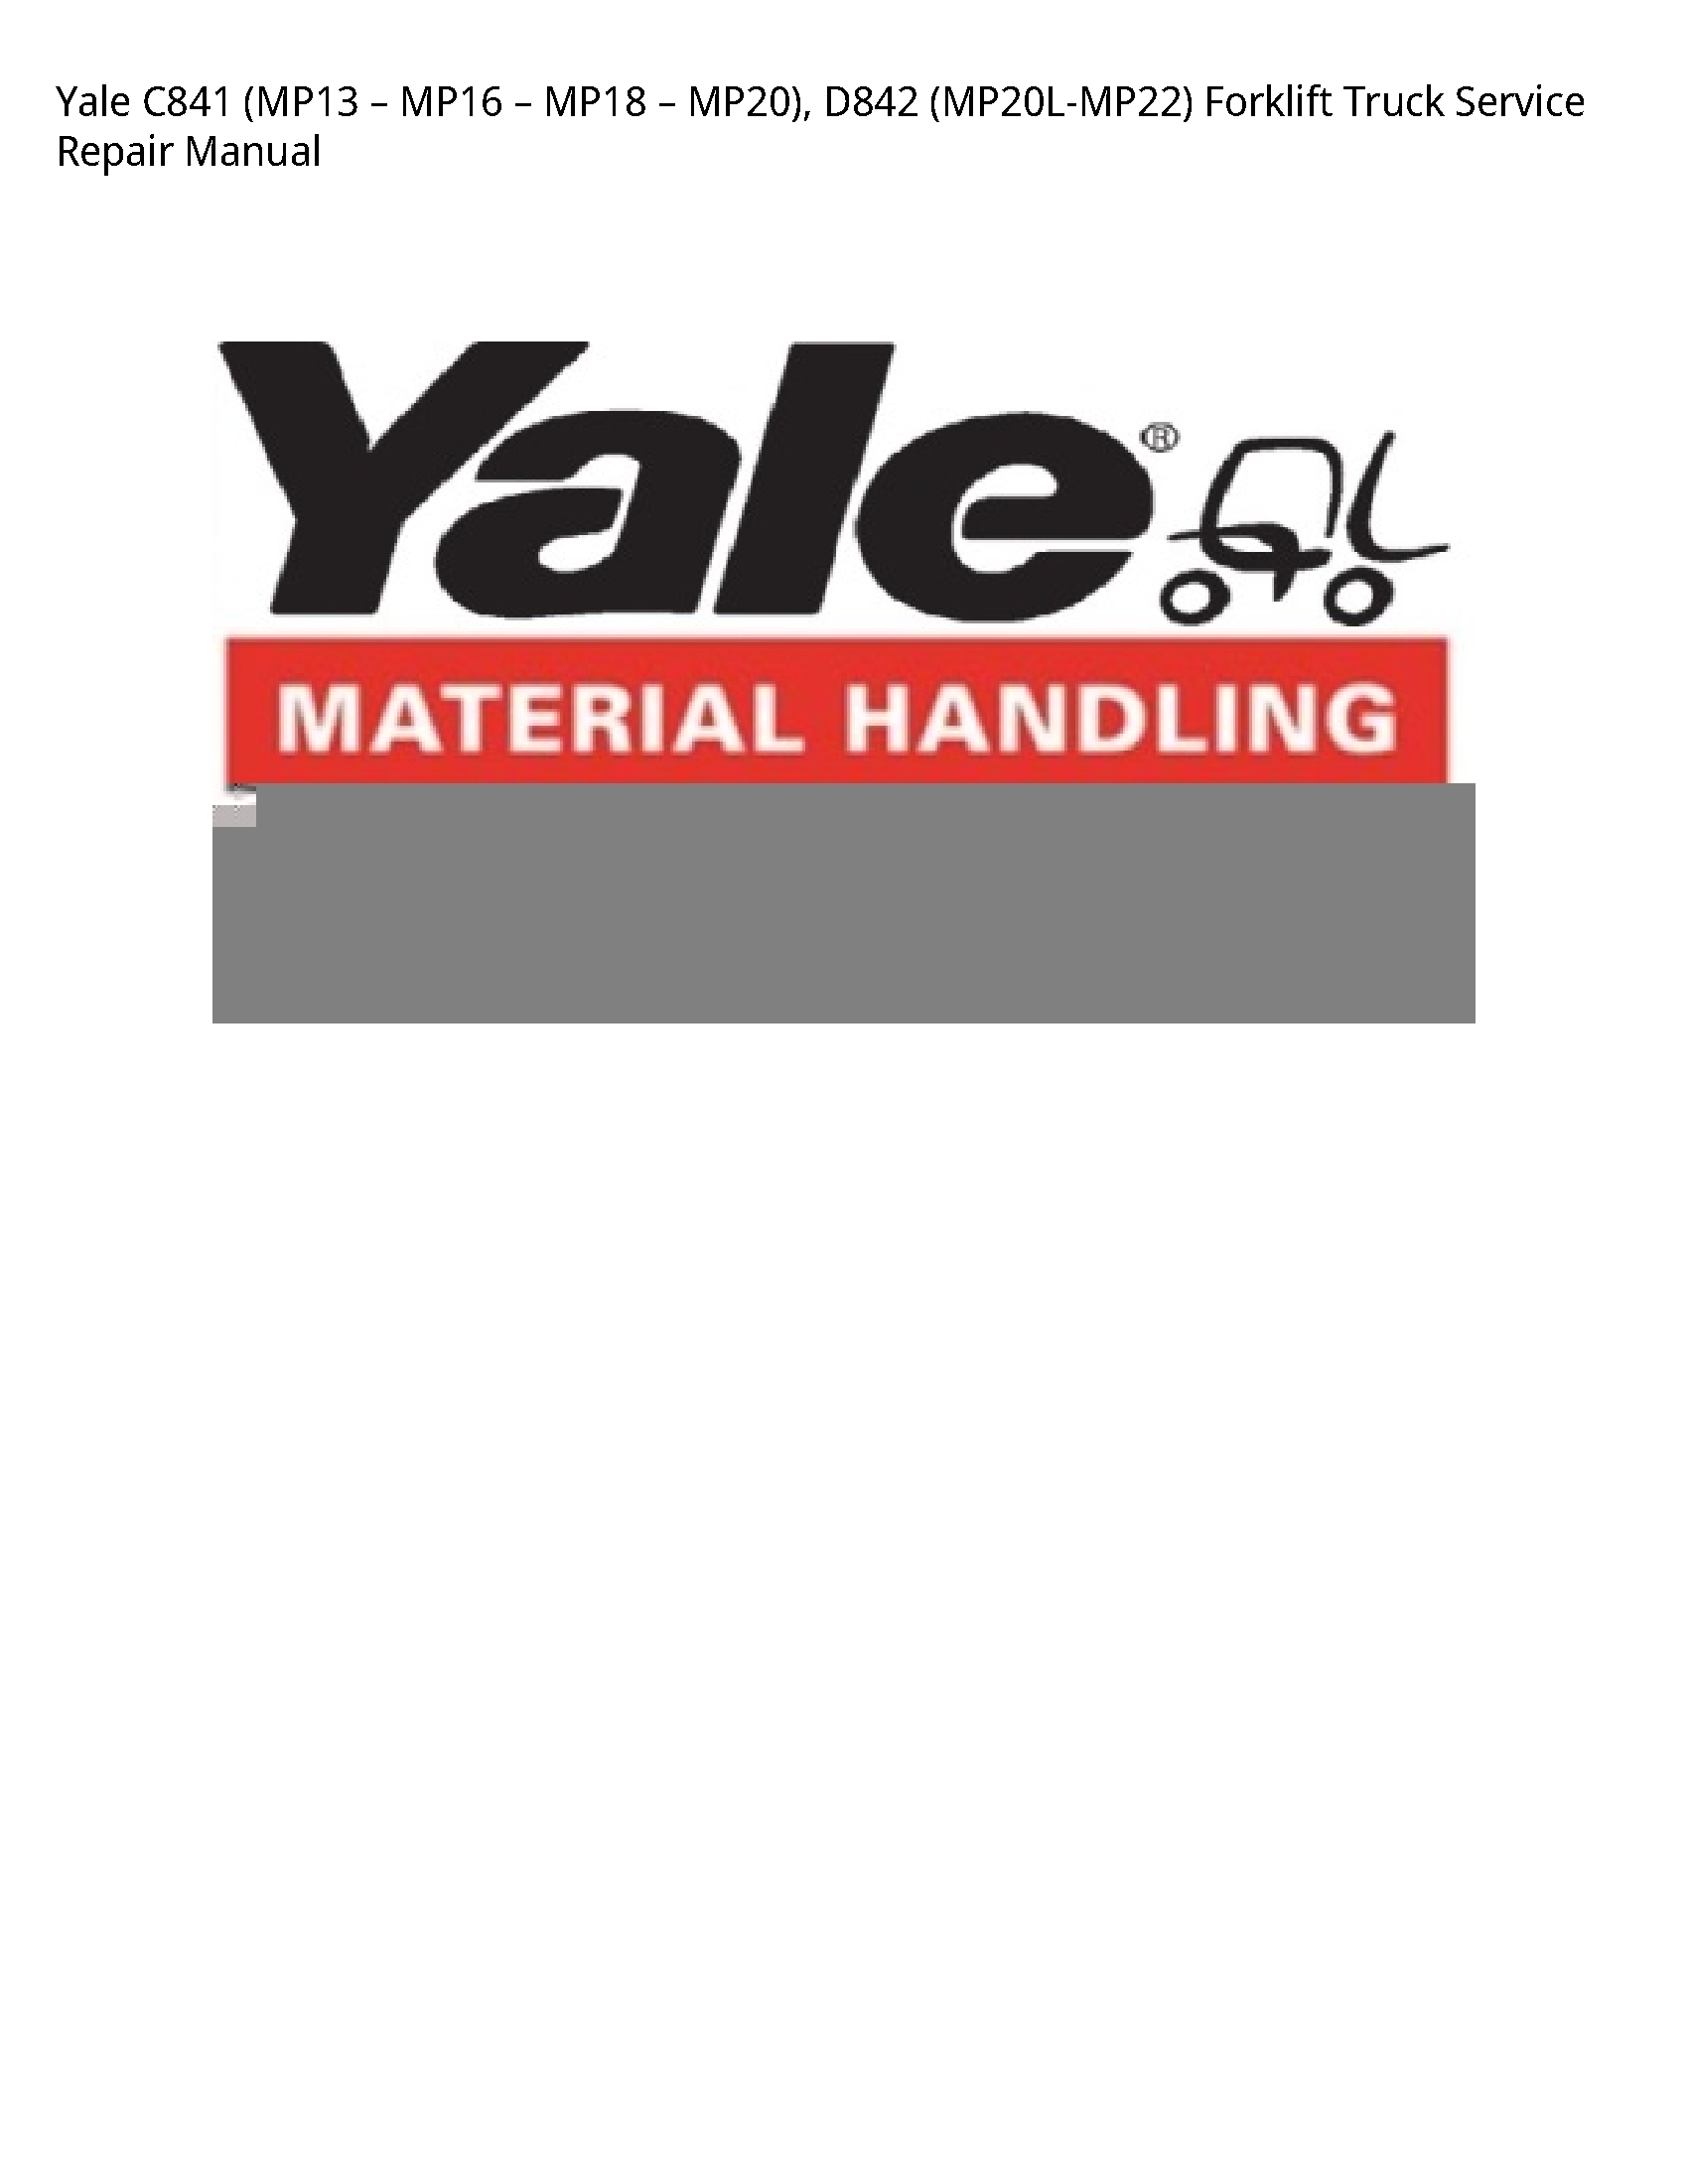 Yale C841 Forklift Truck manual